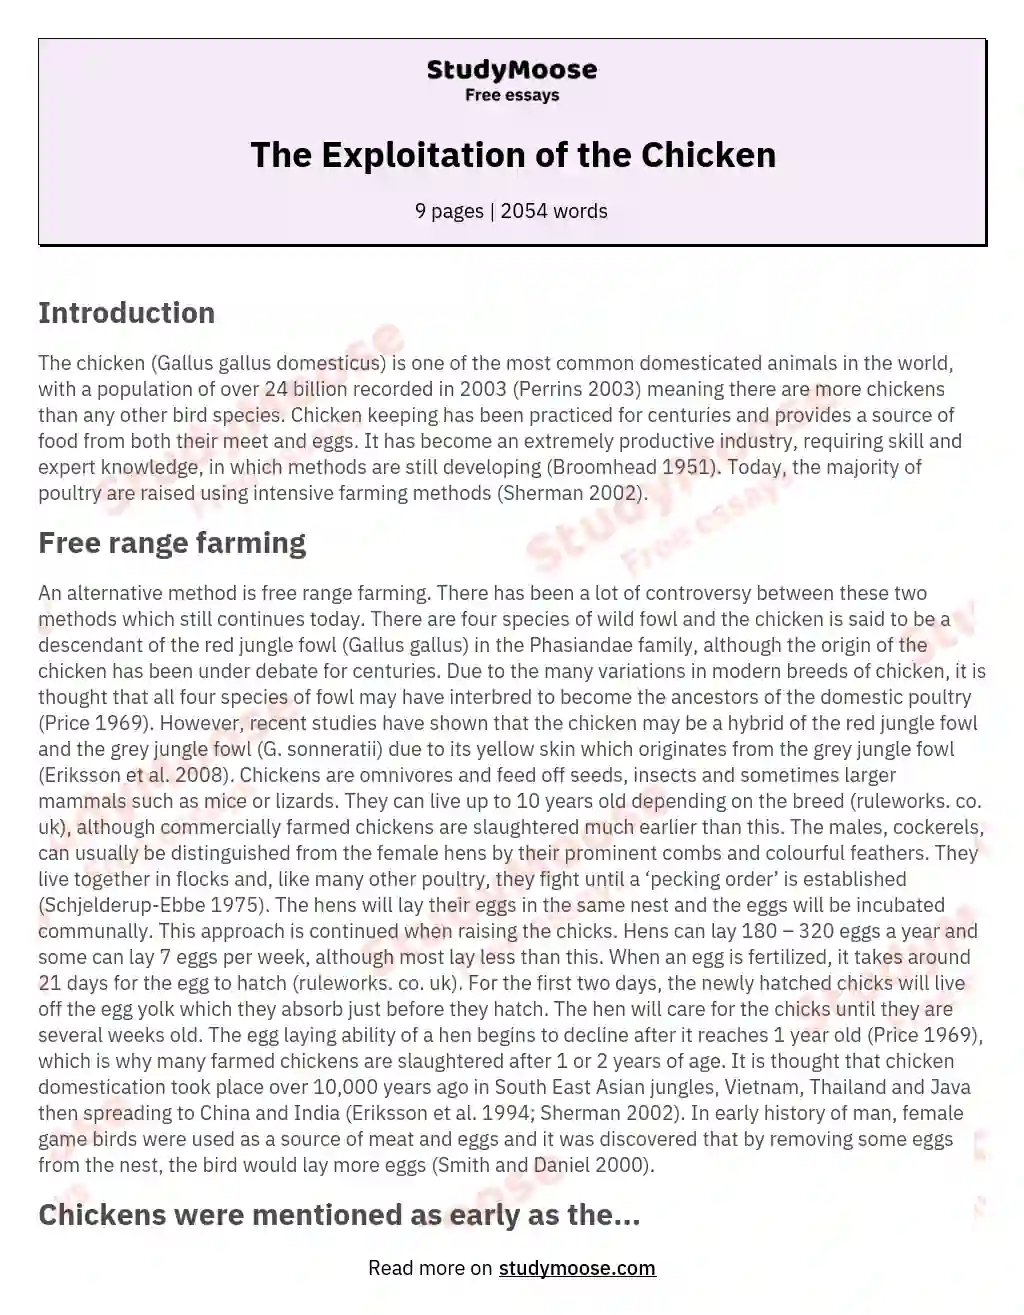 The Exploitation of the Chicken essay